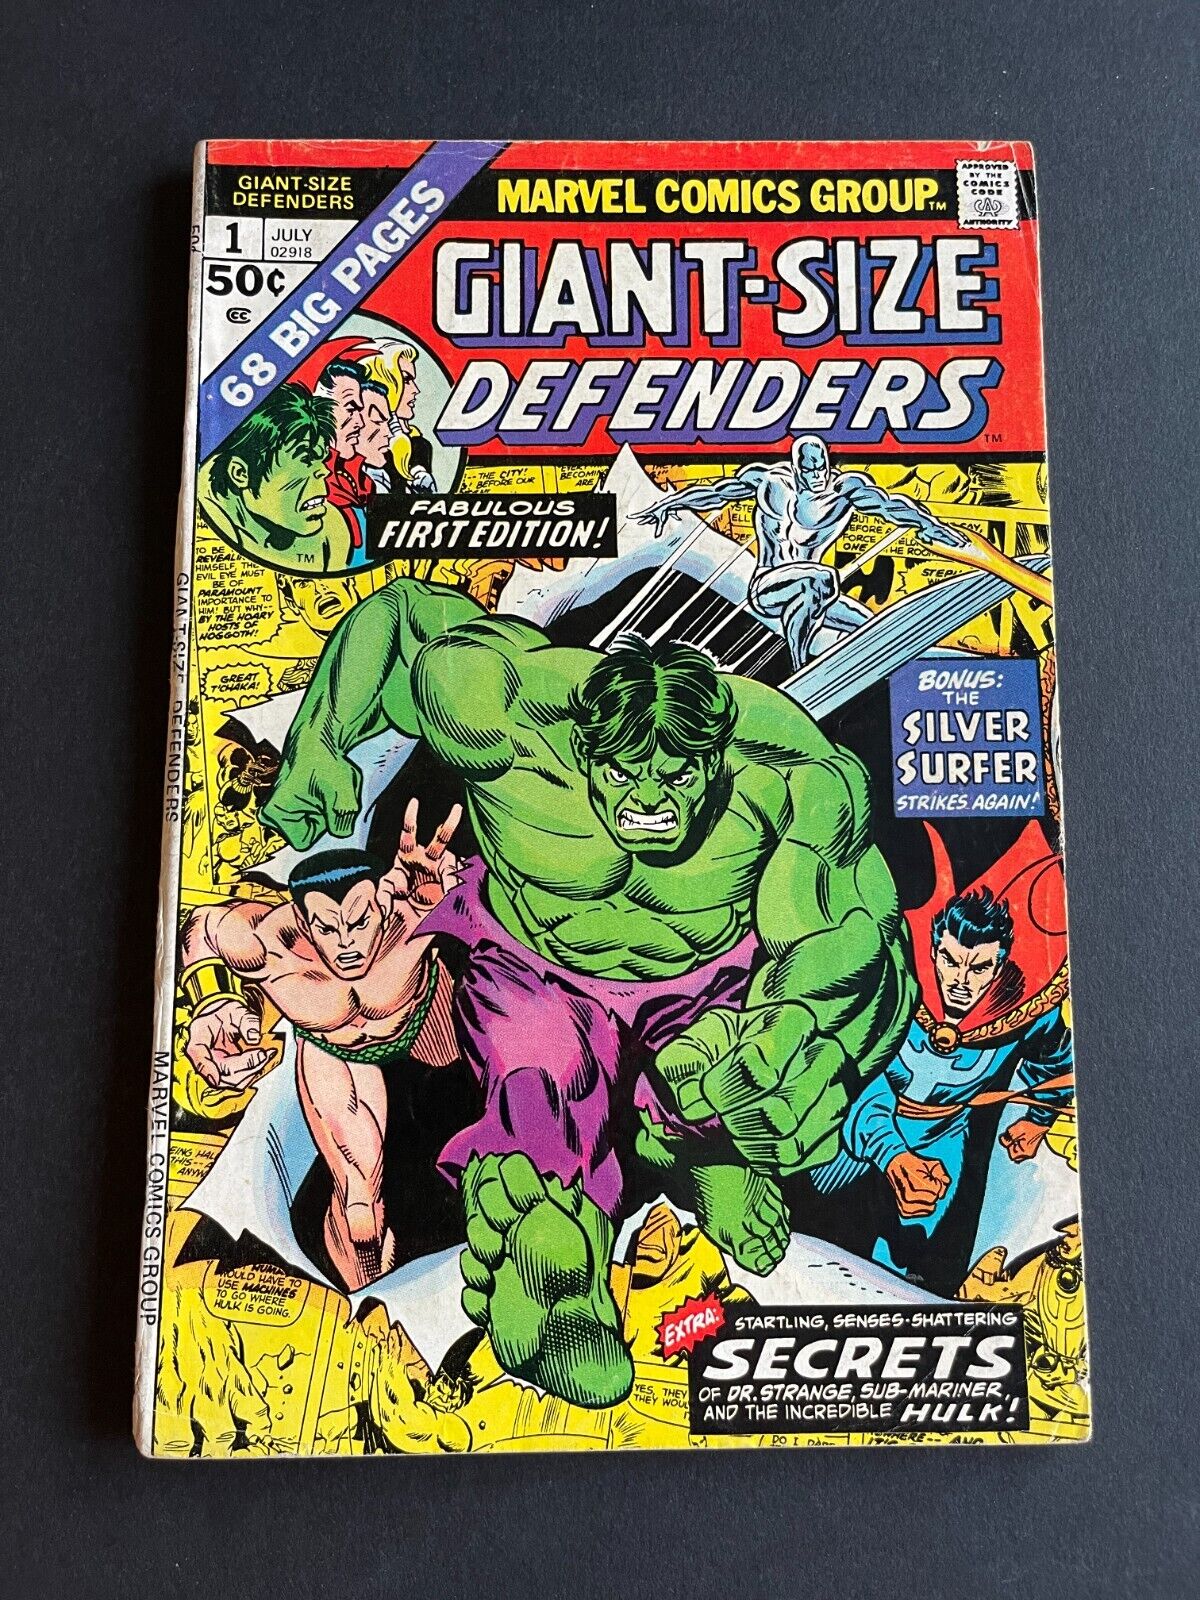 Giant-Size Dr. Defenders - #1 - Way They Were (Marvel, 1974) Fine